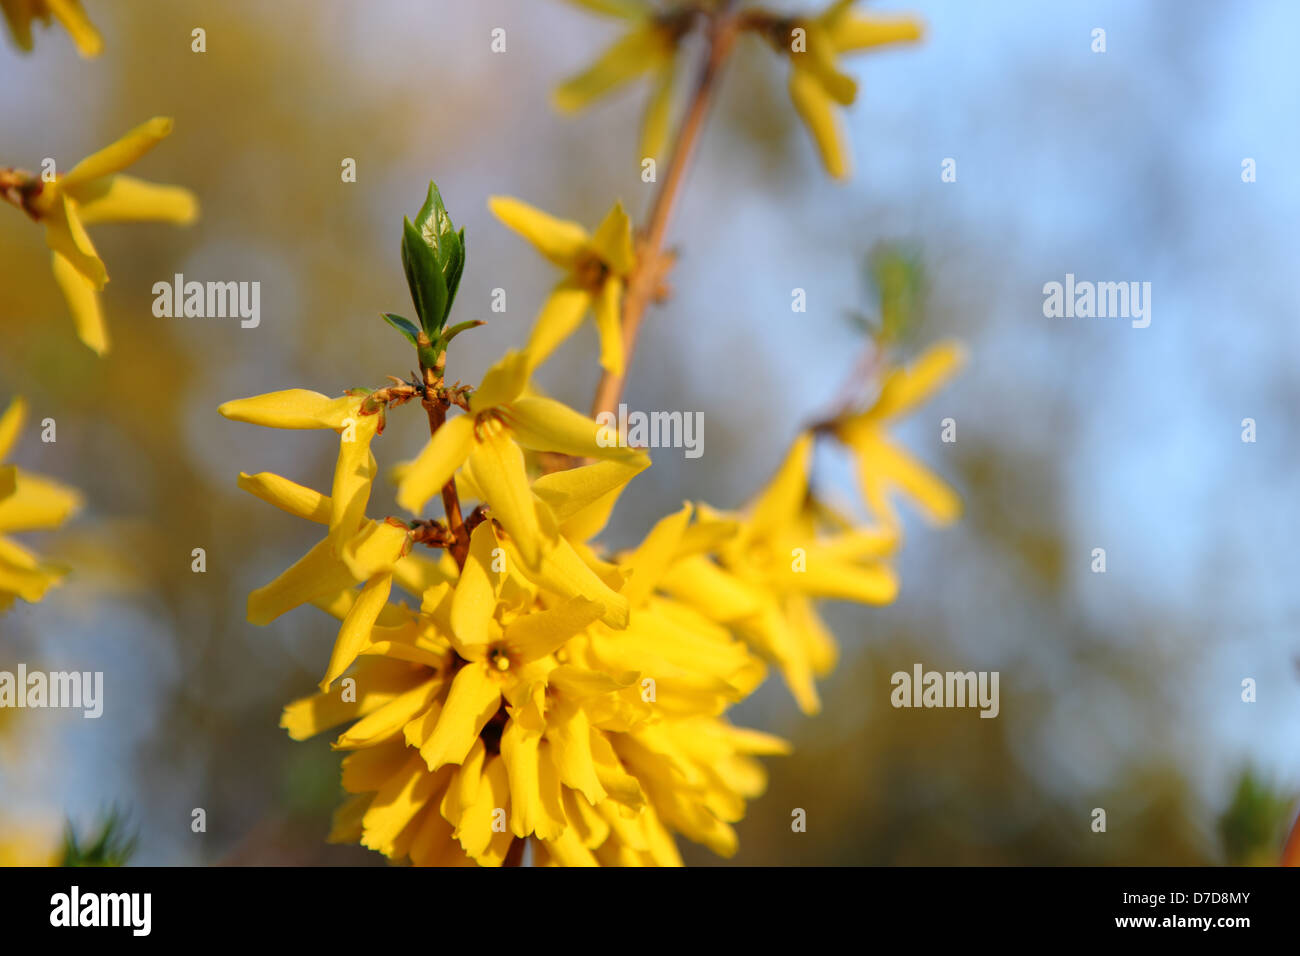 Forsythia flower blooming in the spring, May 2013. Stock Photo